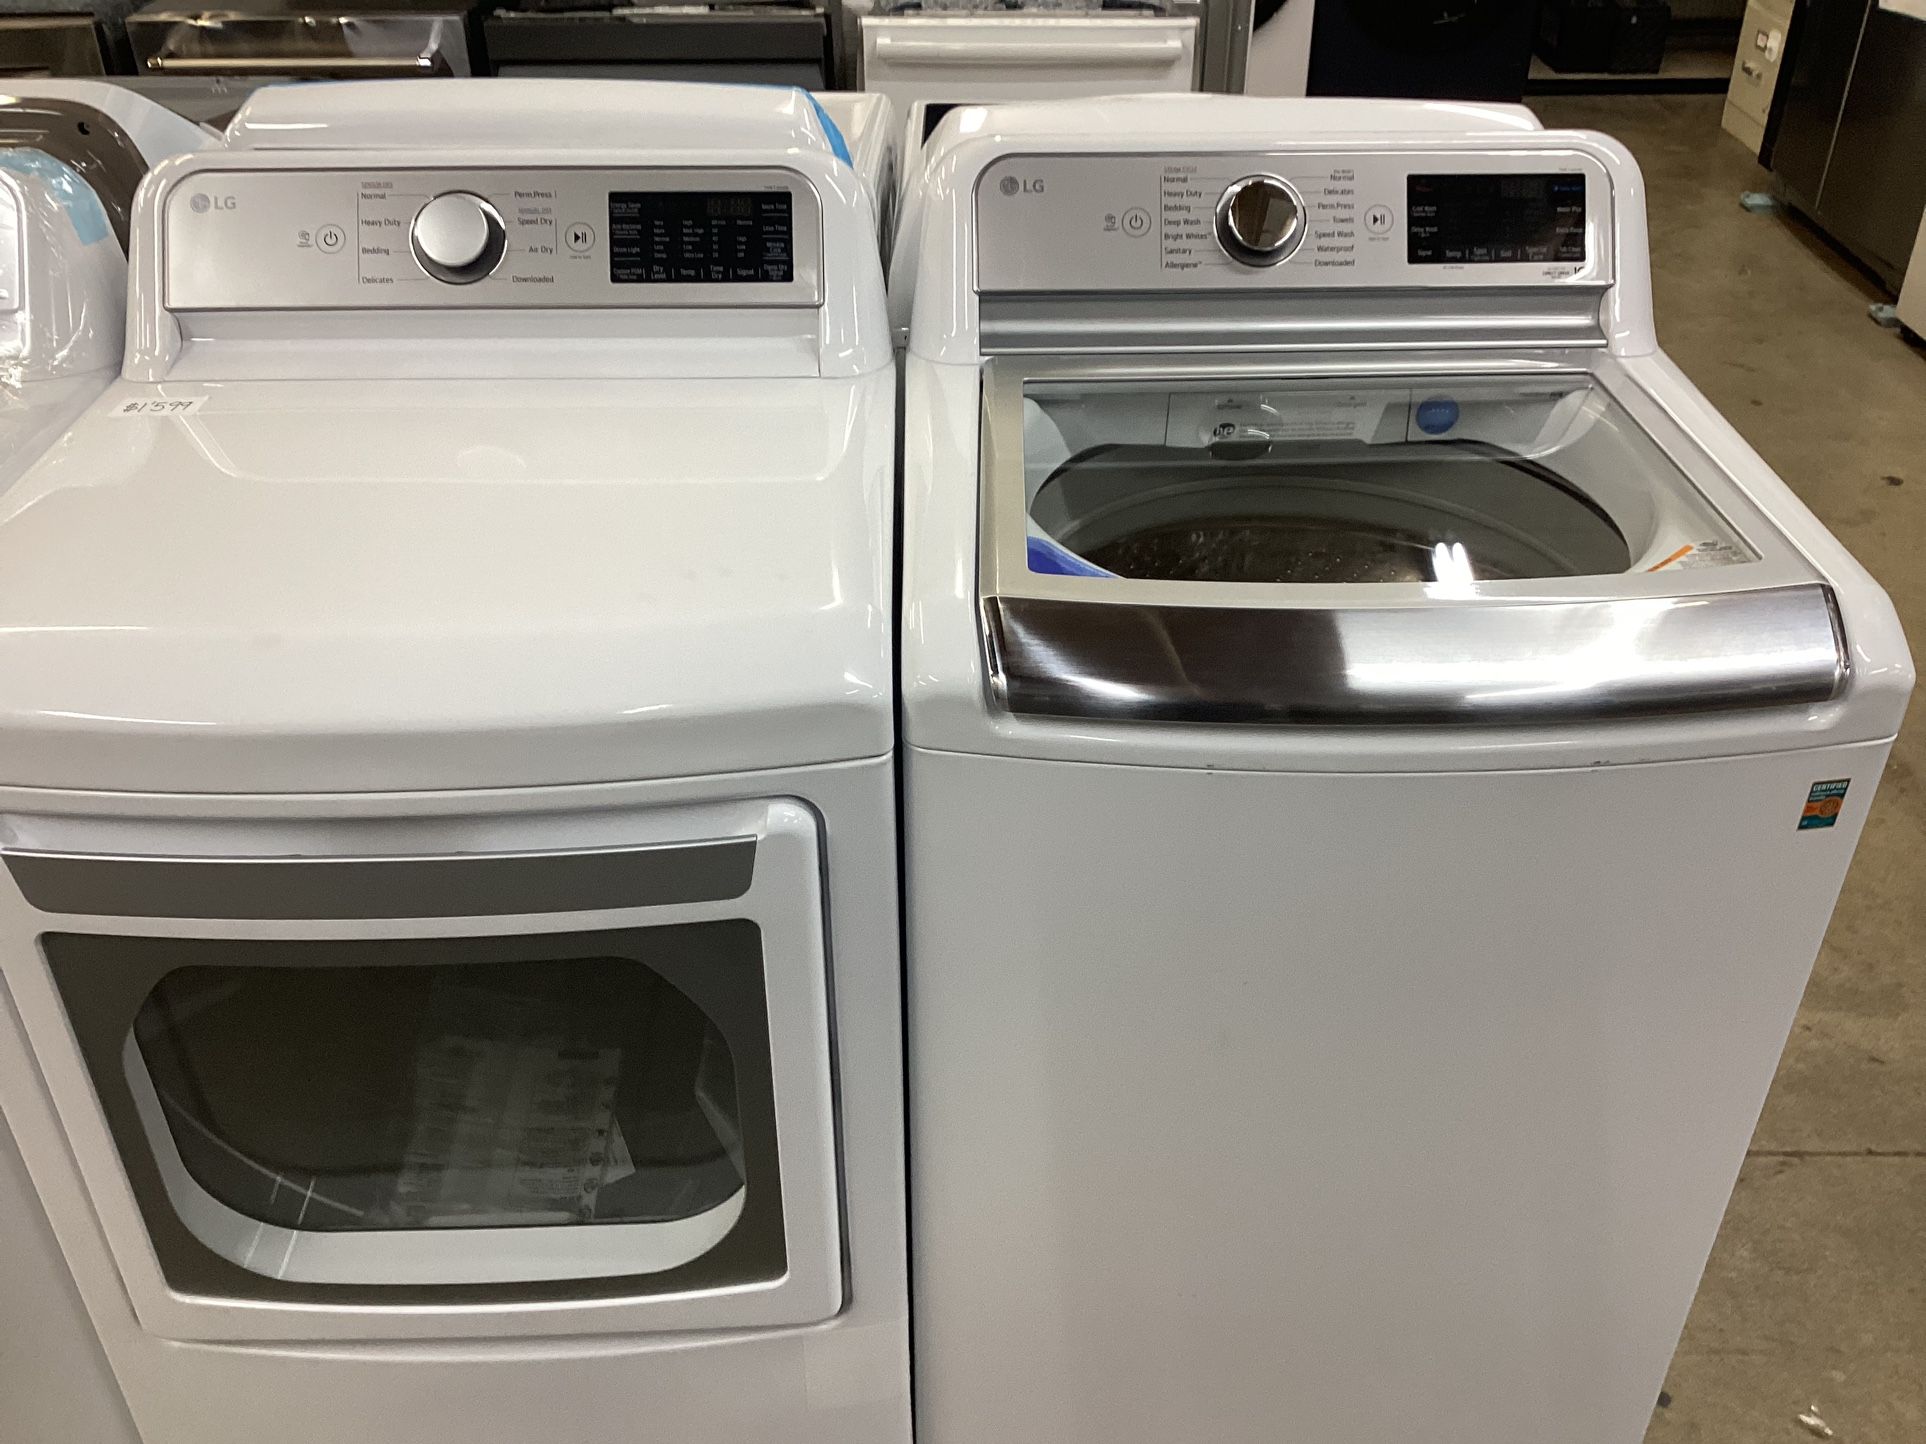 LG Washer And Dryer Set New Scratch And Dent Xl Capacity 5.5 Cu Ft 